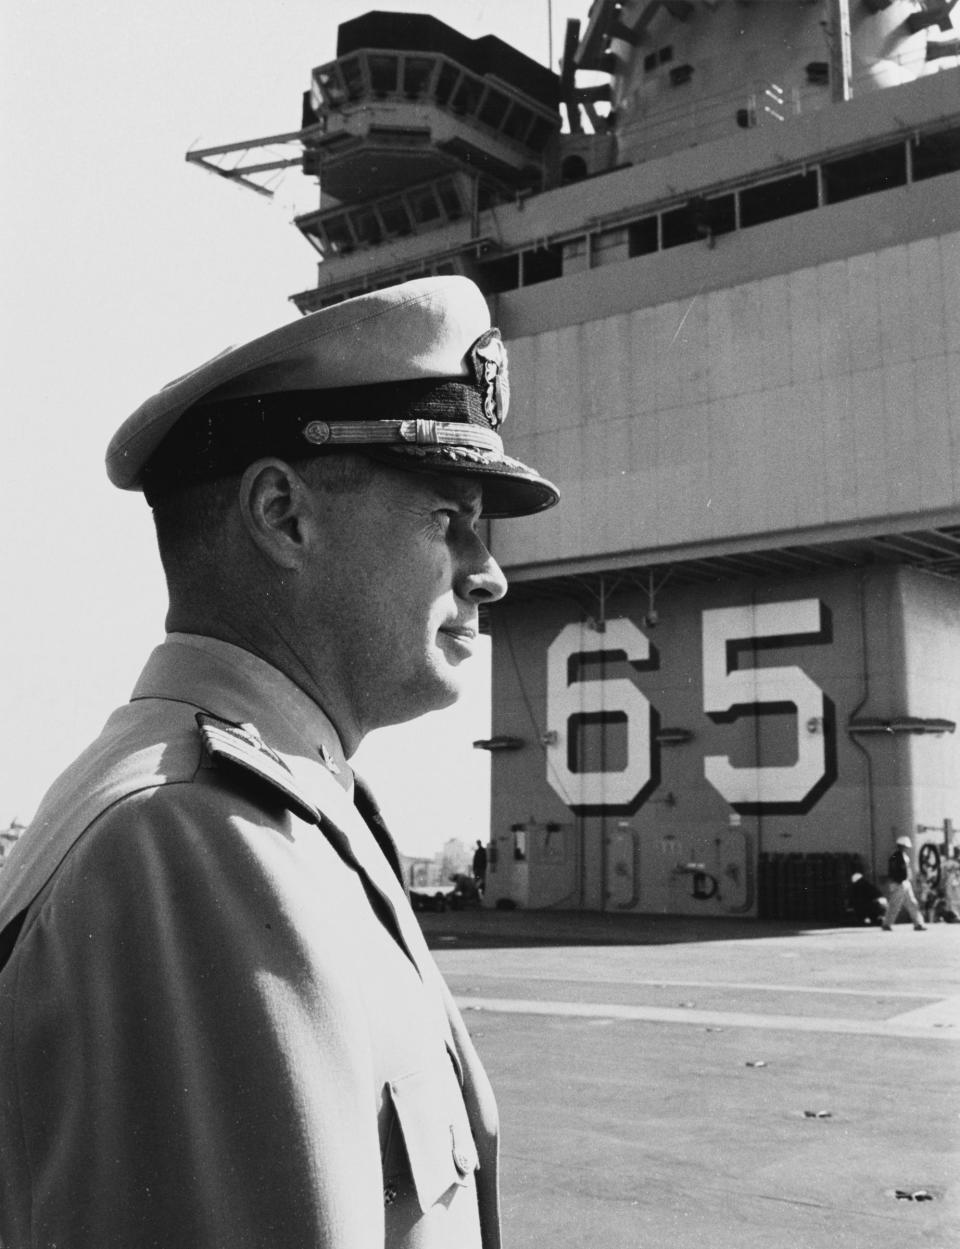 Capt. Vincent de Poix, the first commanding officer of USS Enterprise (CVAN 65), pictured on the flight deck of the carrier. As a young aviator in World War II, he flew combat missions from the deck of the first carrier named Enterprise.